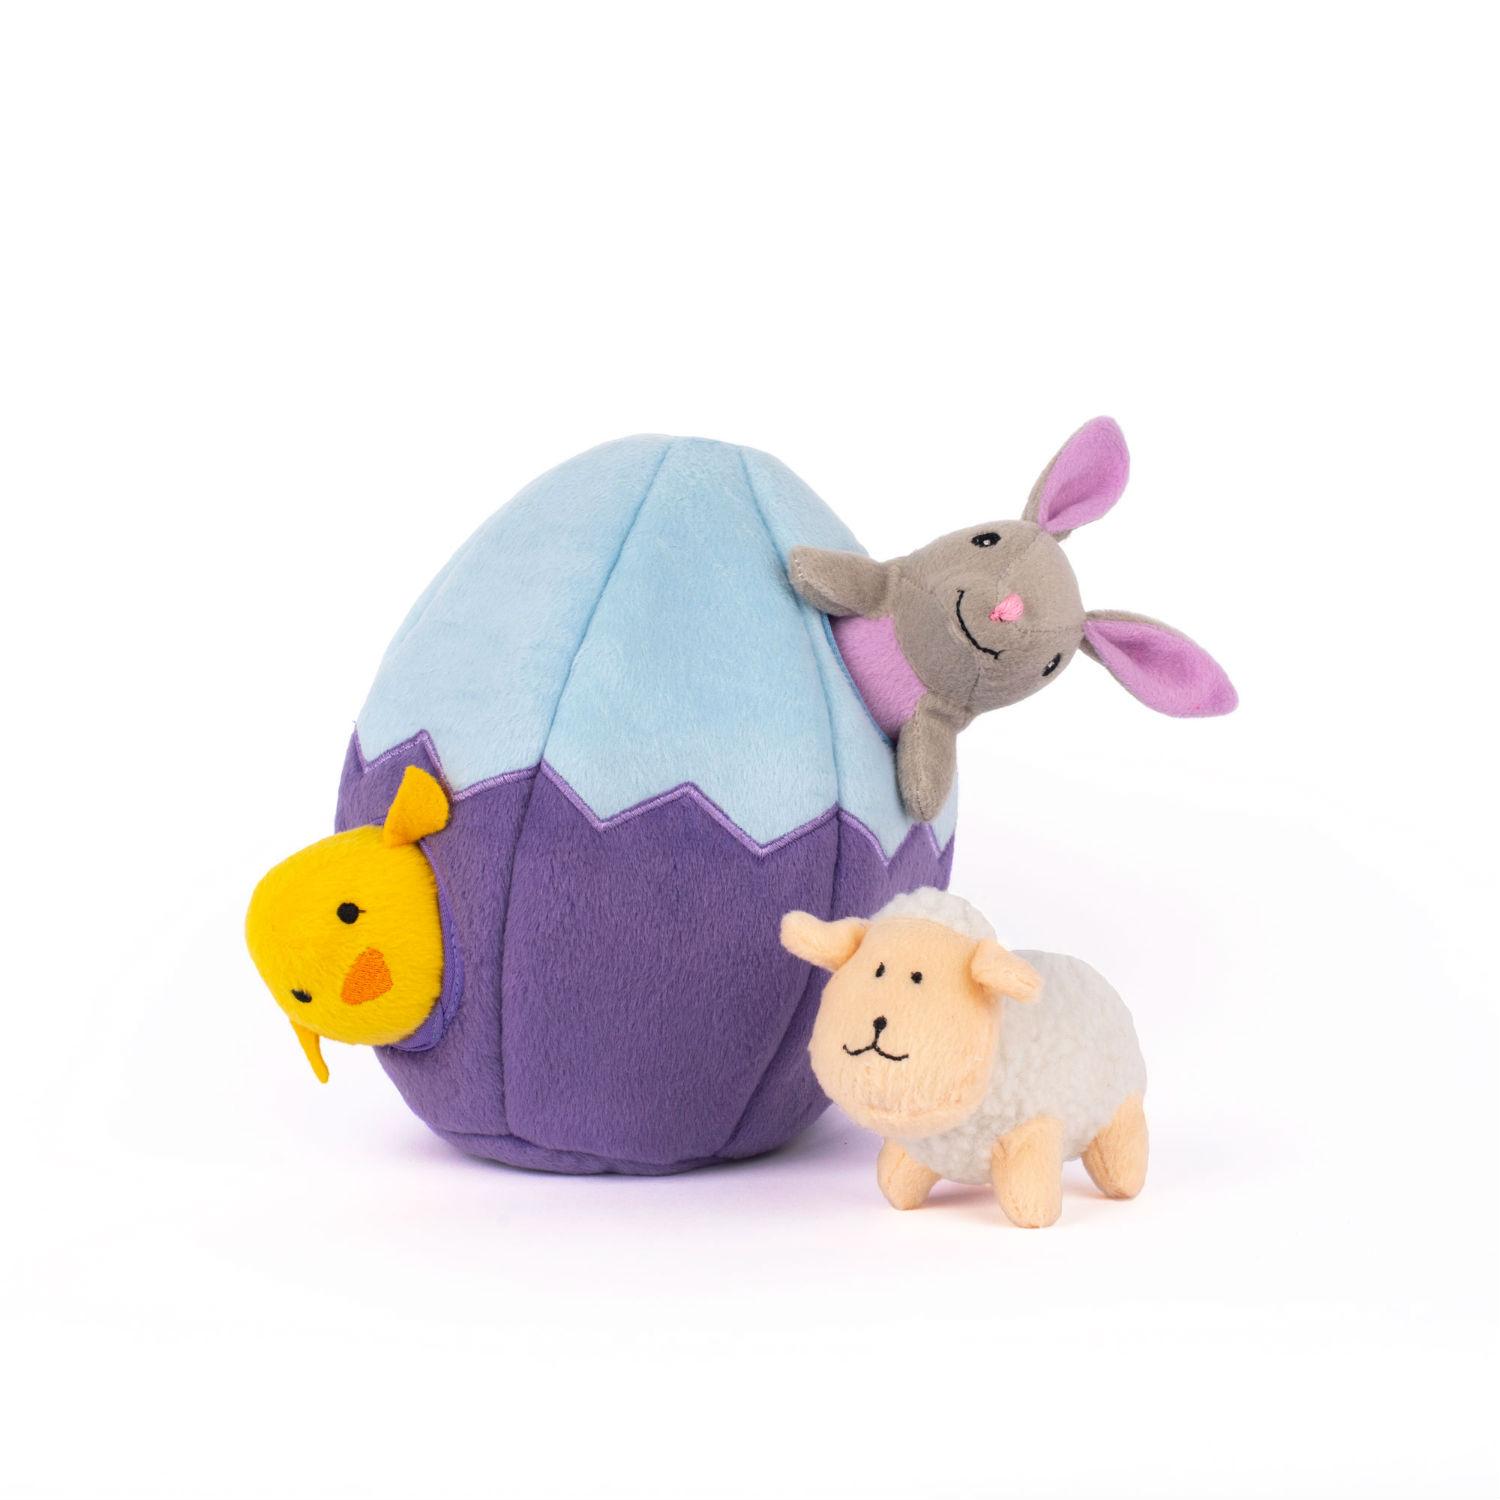 ZippyPaws Burrow Dog Toy - Easter Egg and Friends